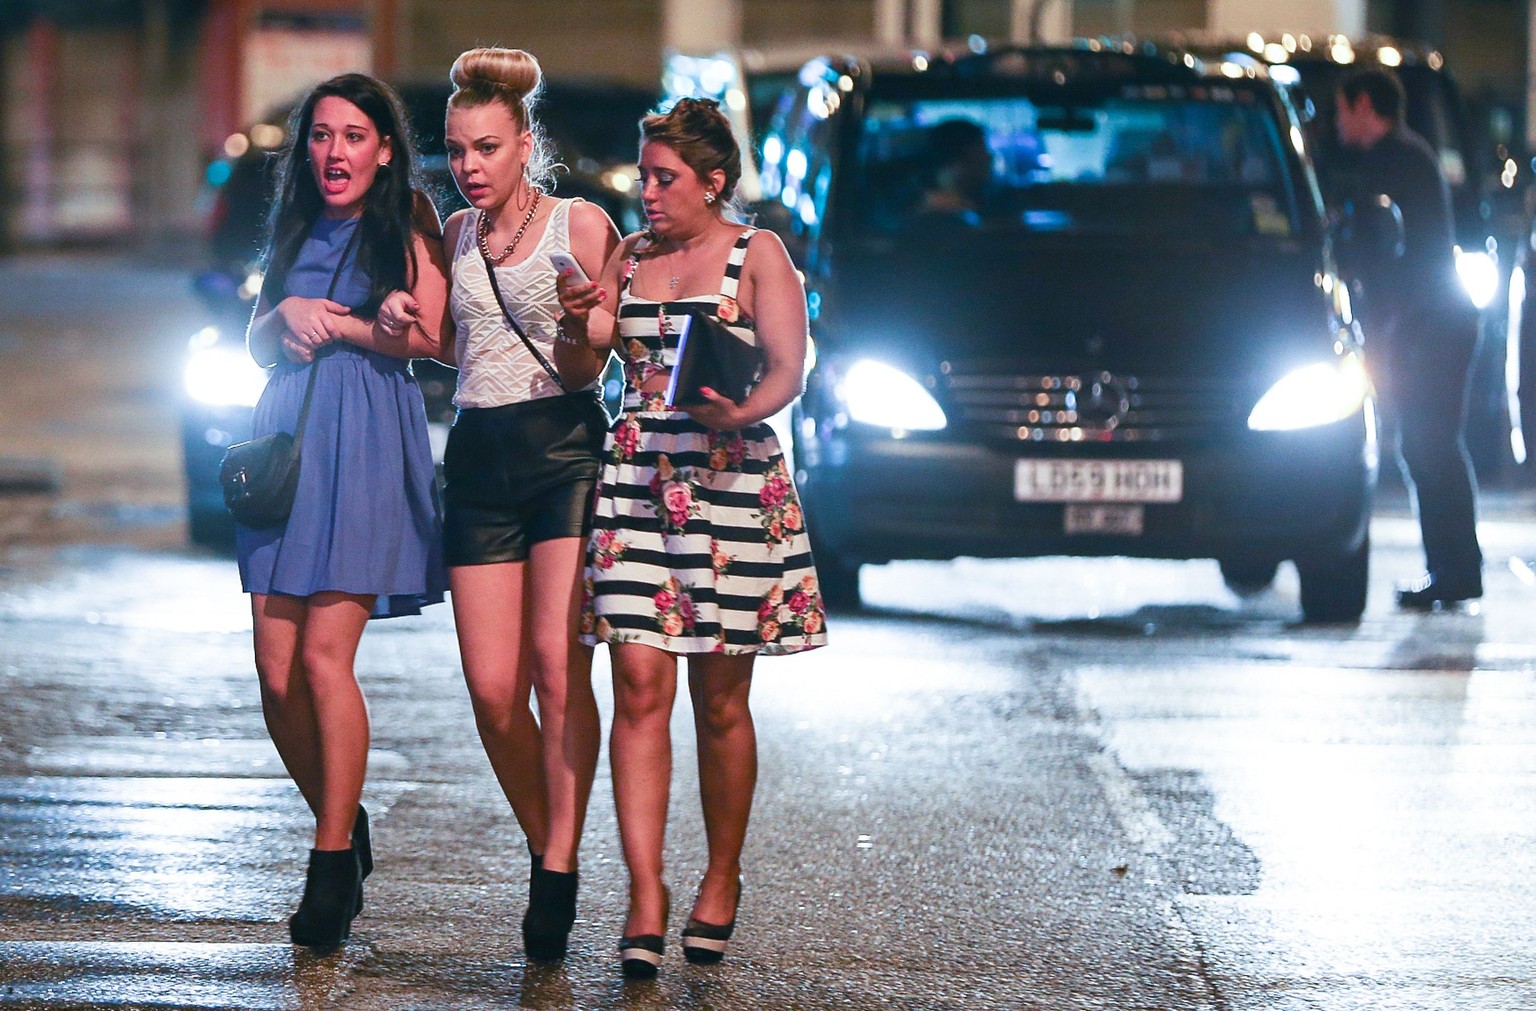 Mandatory Credit: Photo by London News Pictures/REX/Shutterstock (3466396f)
Three women cross the street towards the Printworks nightclub venue
New Year&#039;s celebrations, Manchester, Britain - 31 ...